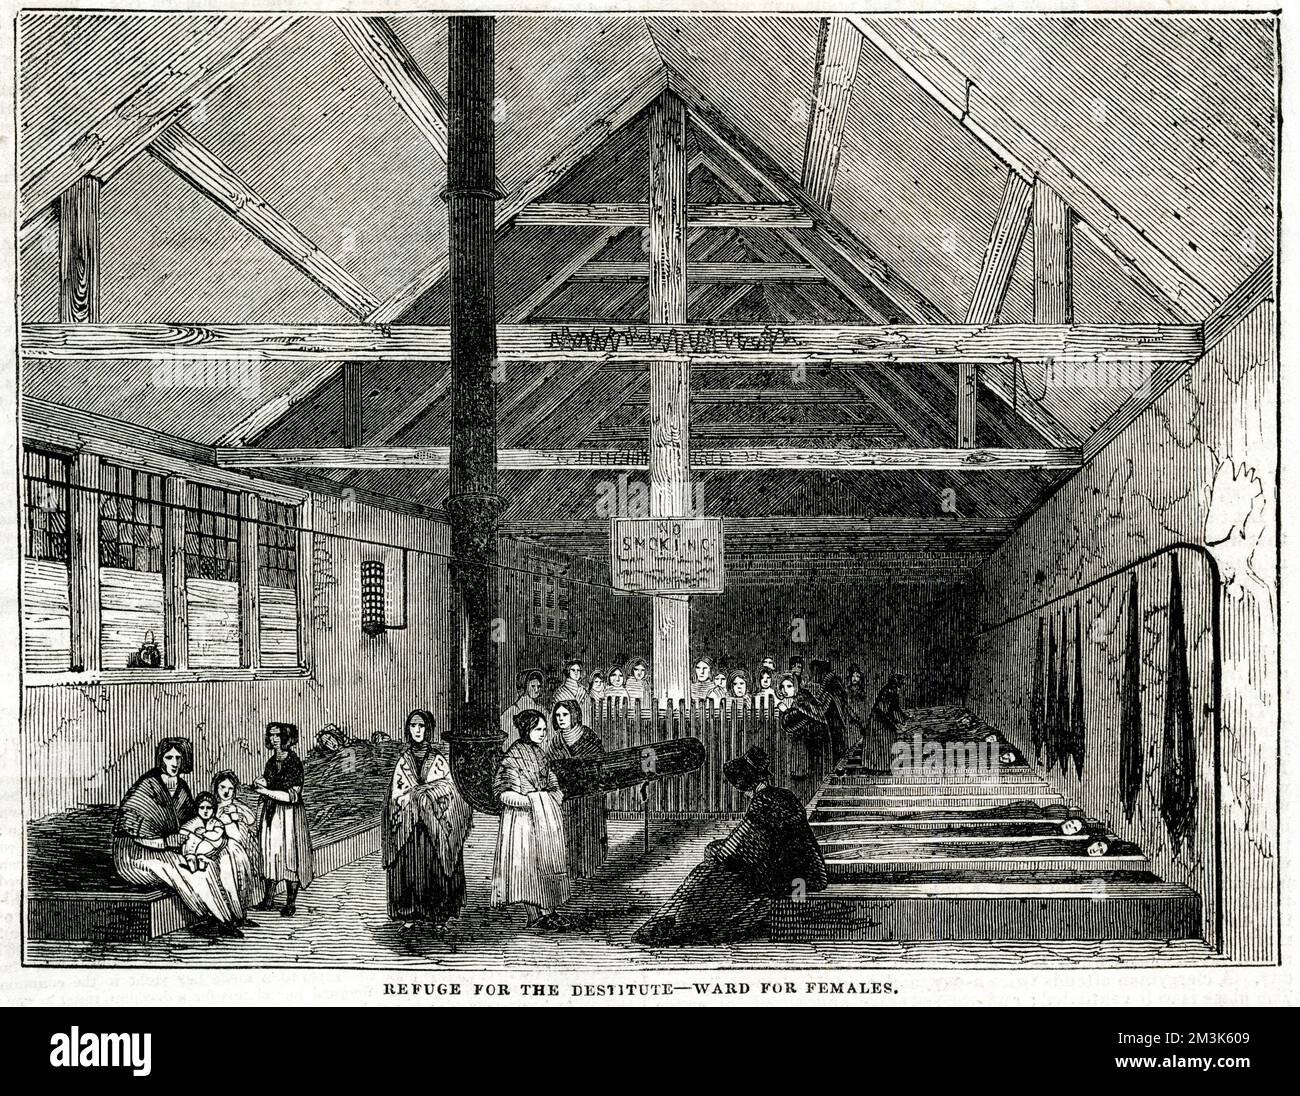 This refuge for the destitute and homeless was situated in the Playhouse Yard, Whitecross Street. This is the ward for females with coffin like boxes for beds. The refuge consisted of three rooms, lit with gas and some smaller rooms. The men and women slept in separate rooms, or wards with children staying in the women's ward. 650 people could be accomodated here. There was a prominent - No Smoking - sign displayed in both male and female wards. People slept in their clothes and in the morning would receive half a pound of bread before having to leave. On Sundays, they received cheese as well Stock Photo